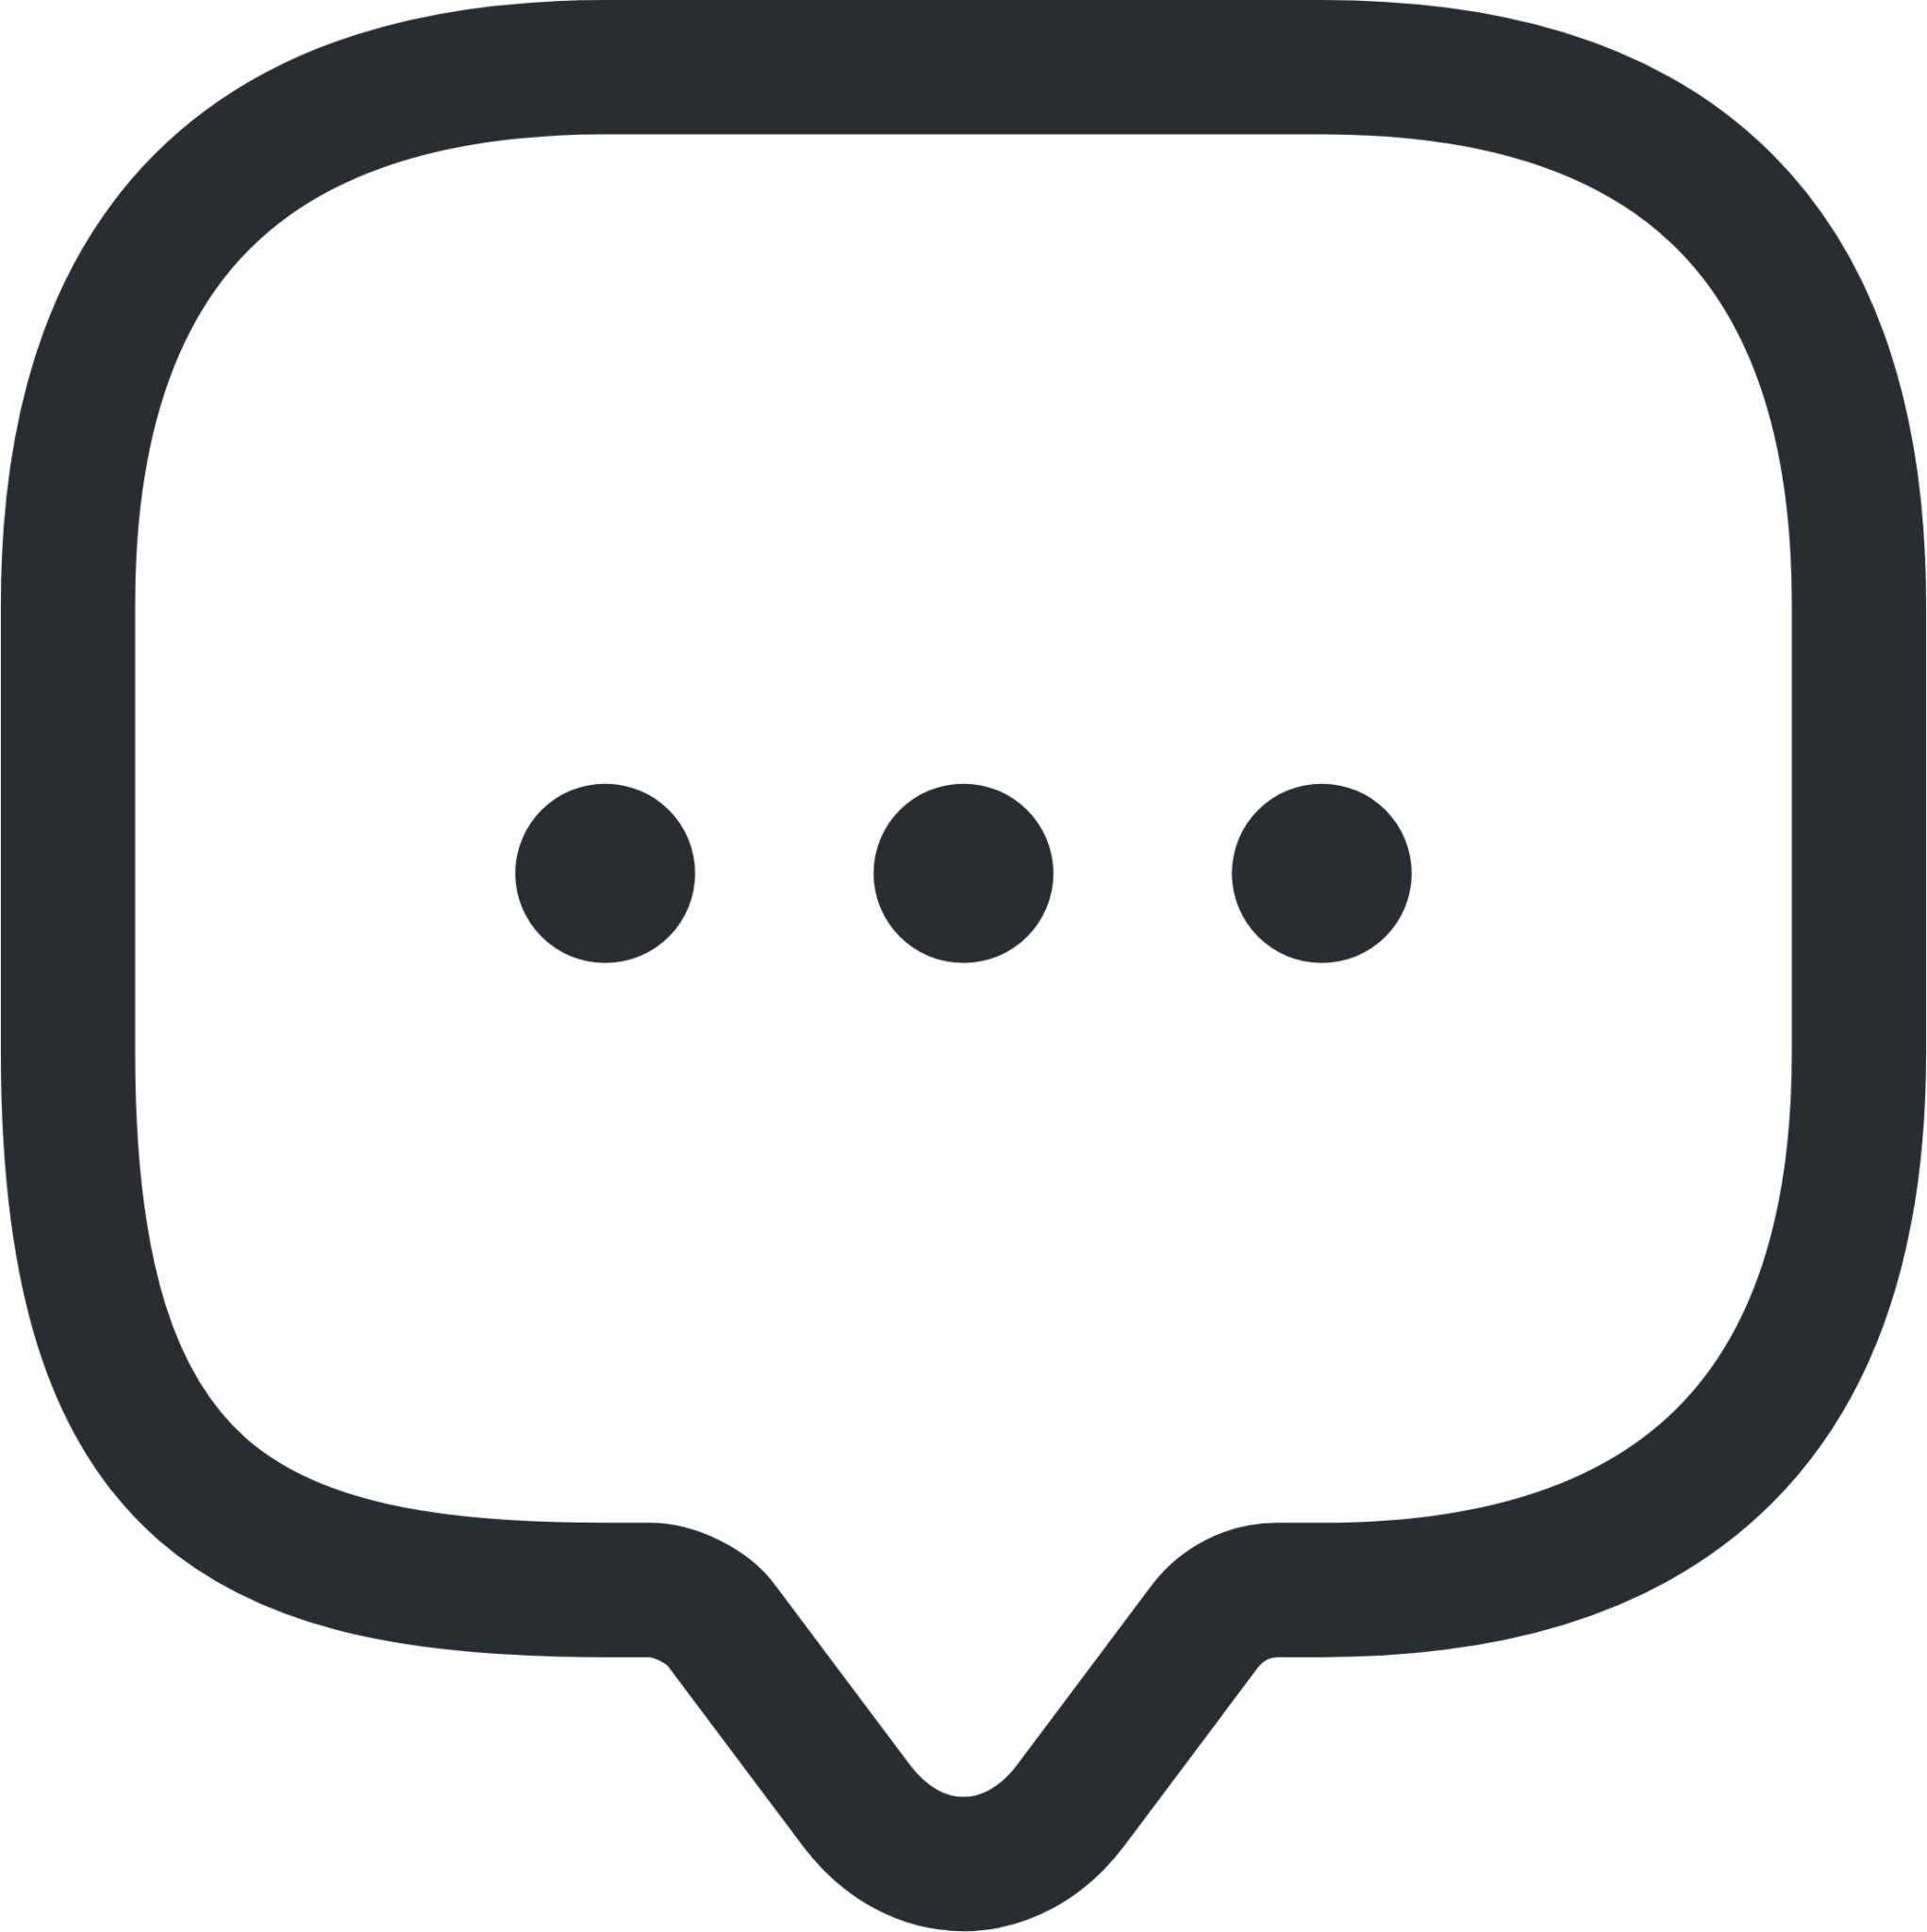 messages icon png